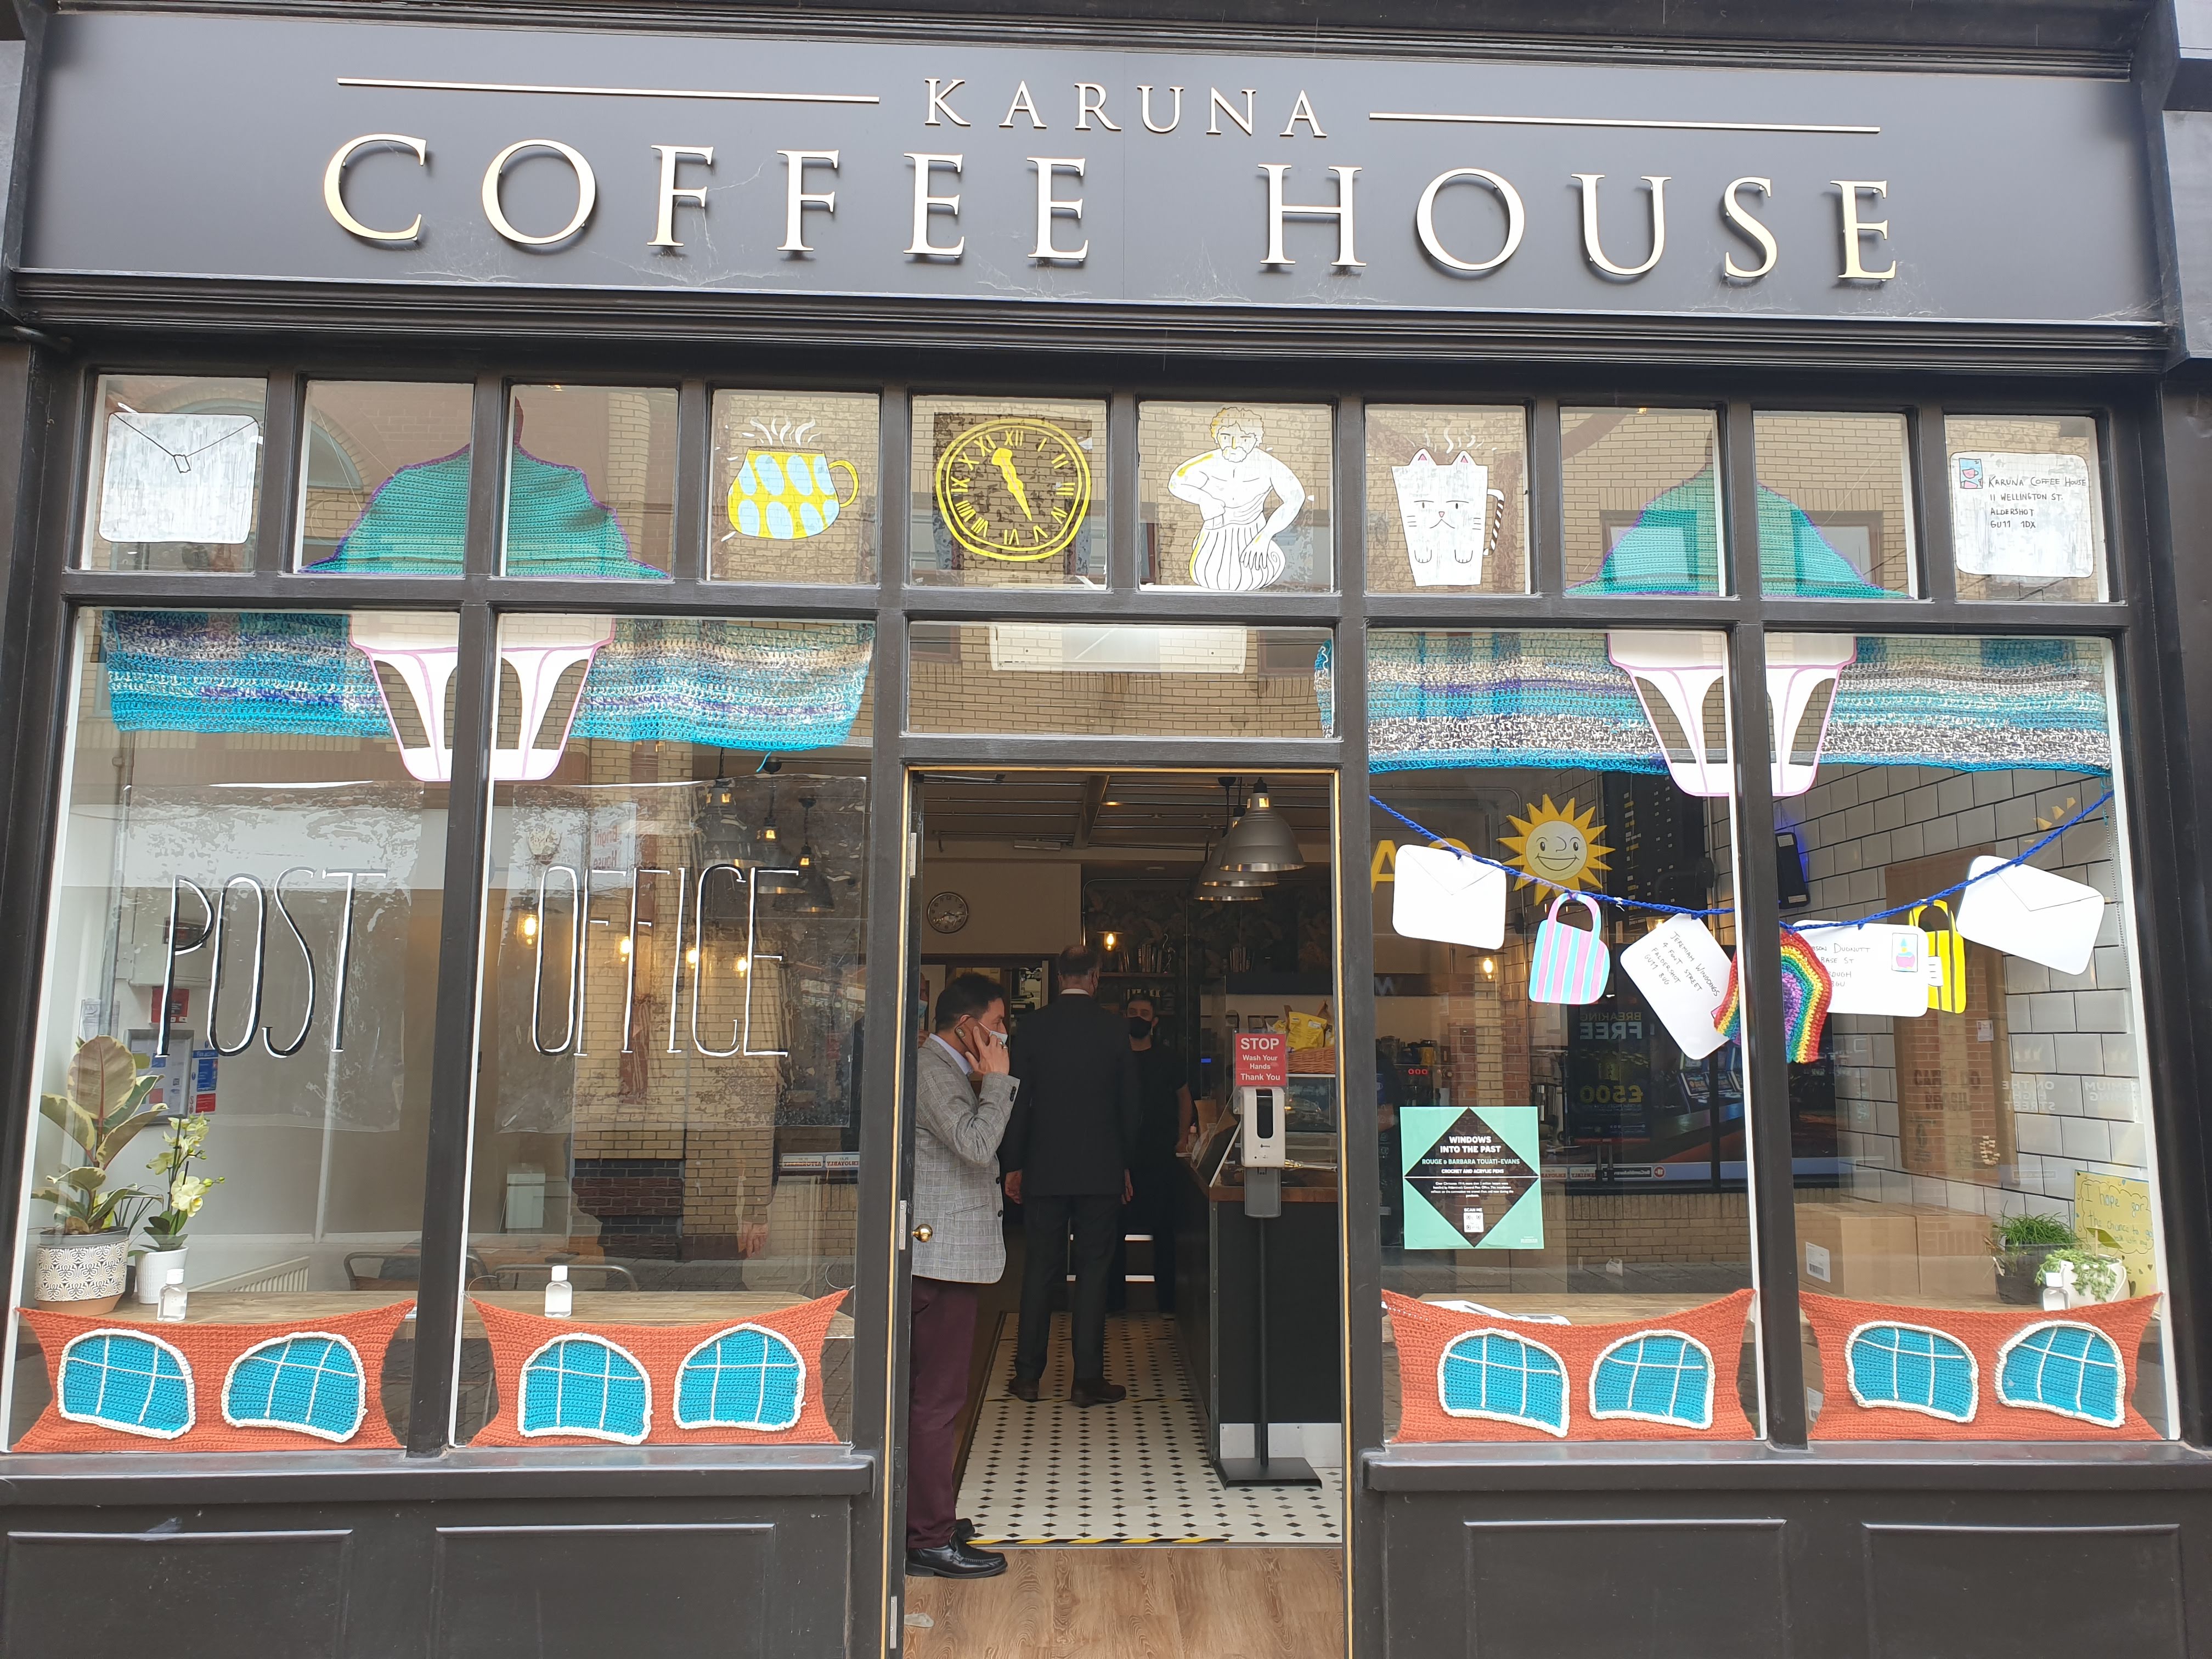 the front of a coffee shop. in the windows there are a number of decorations made of crochet and cartoon drawings on paper and clear plastic. along the top, there are two envelopes, two mugs, a clock, and a statue. a sign reading post office hangs in the left window.